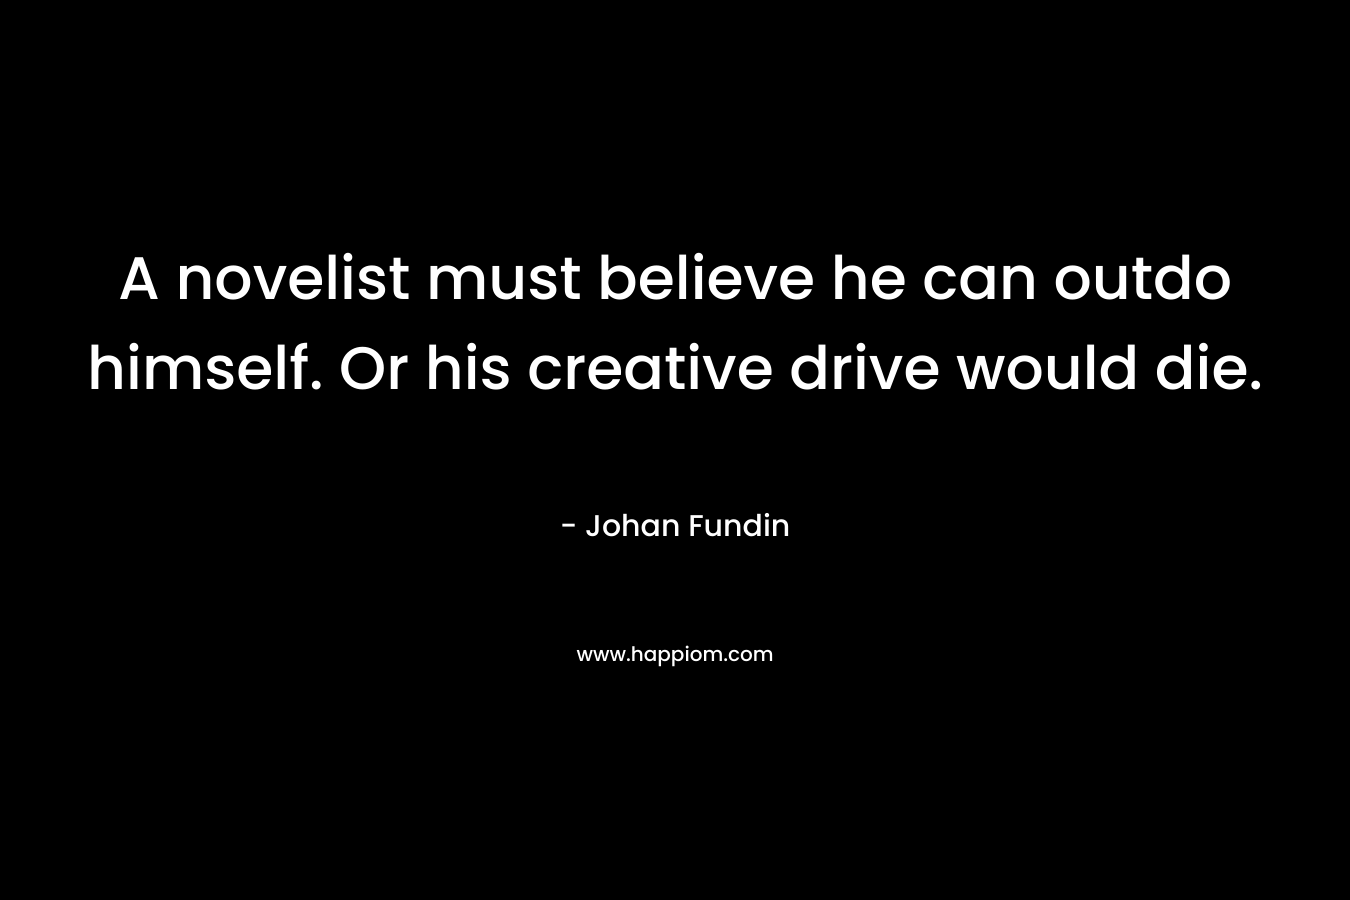 A novelist must believe he can outdo himself. Or his creative drive would die. – Johan Fundin